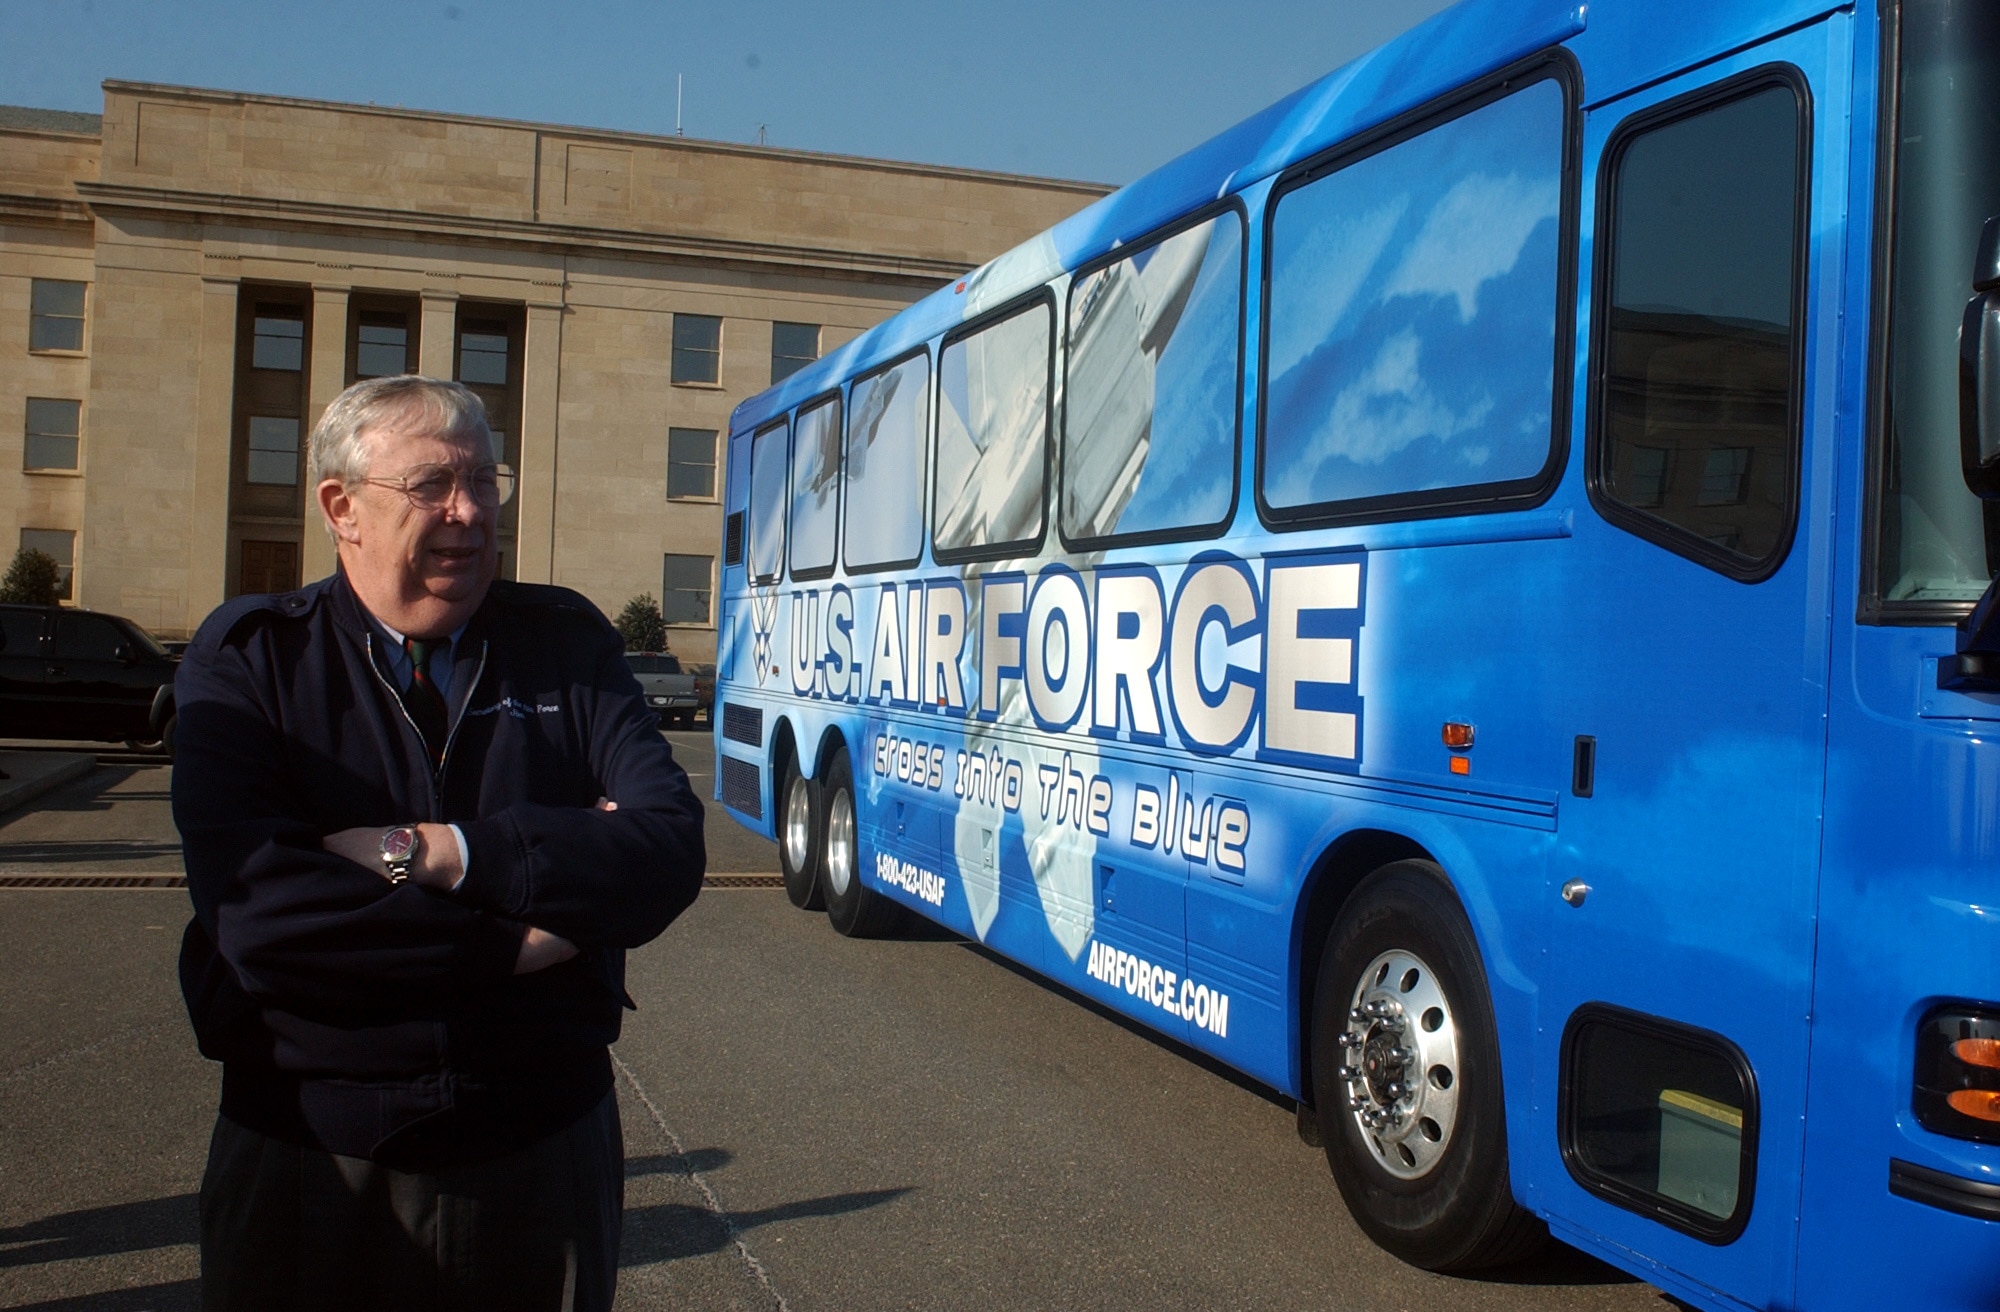 WASHINGTON -- Secretary of the Air Force Dr. James G. Roche inspects the new bus design scheme at the Pentagon on Feb. 19.  The new graphic design on the buses reflects the mission of the Air Force and demonstrates the diversity of careers in today's Air Force.  There are a total of 10 buses in this test program.  Four will operate from Bolling Air Force Base, D.C., and the other six will be at Randolph AFB, Texas; the U.S. Air Force Academy, Colo.; and Nellis AFB, Nev.  (U.S. Air Force photo by Master Sgt. Gary R. Coppage)